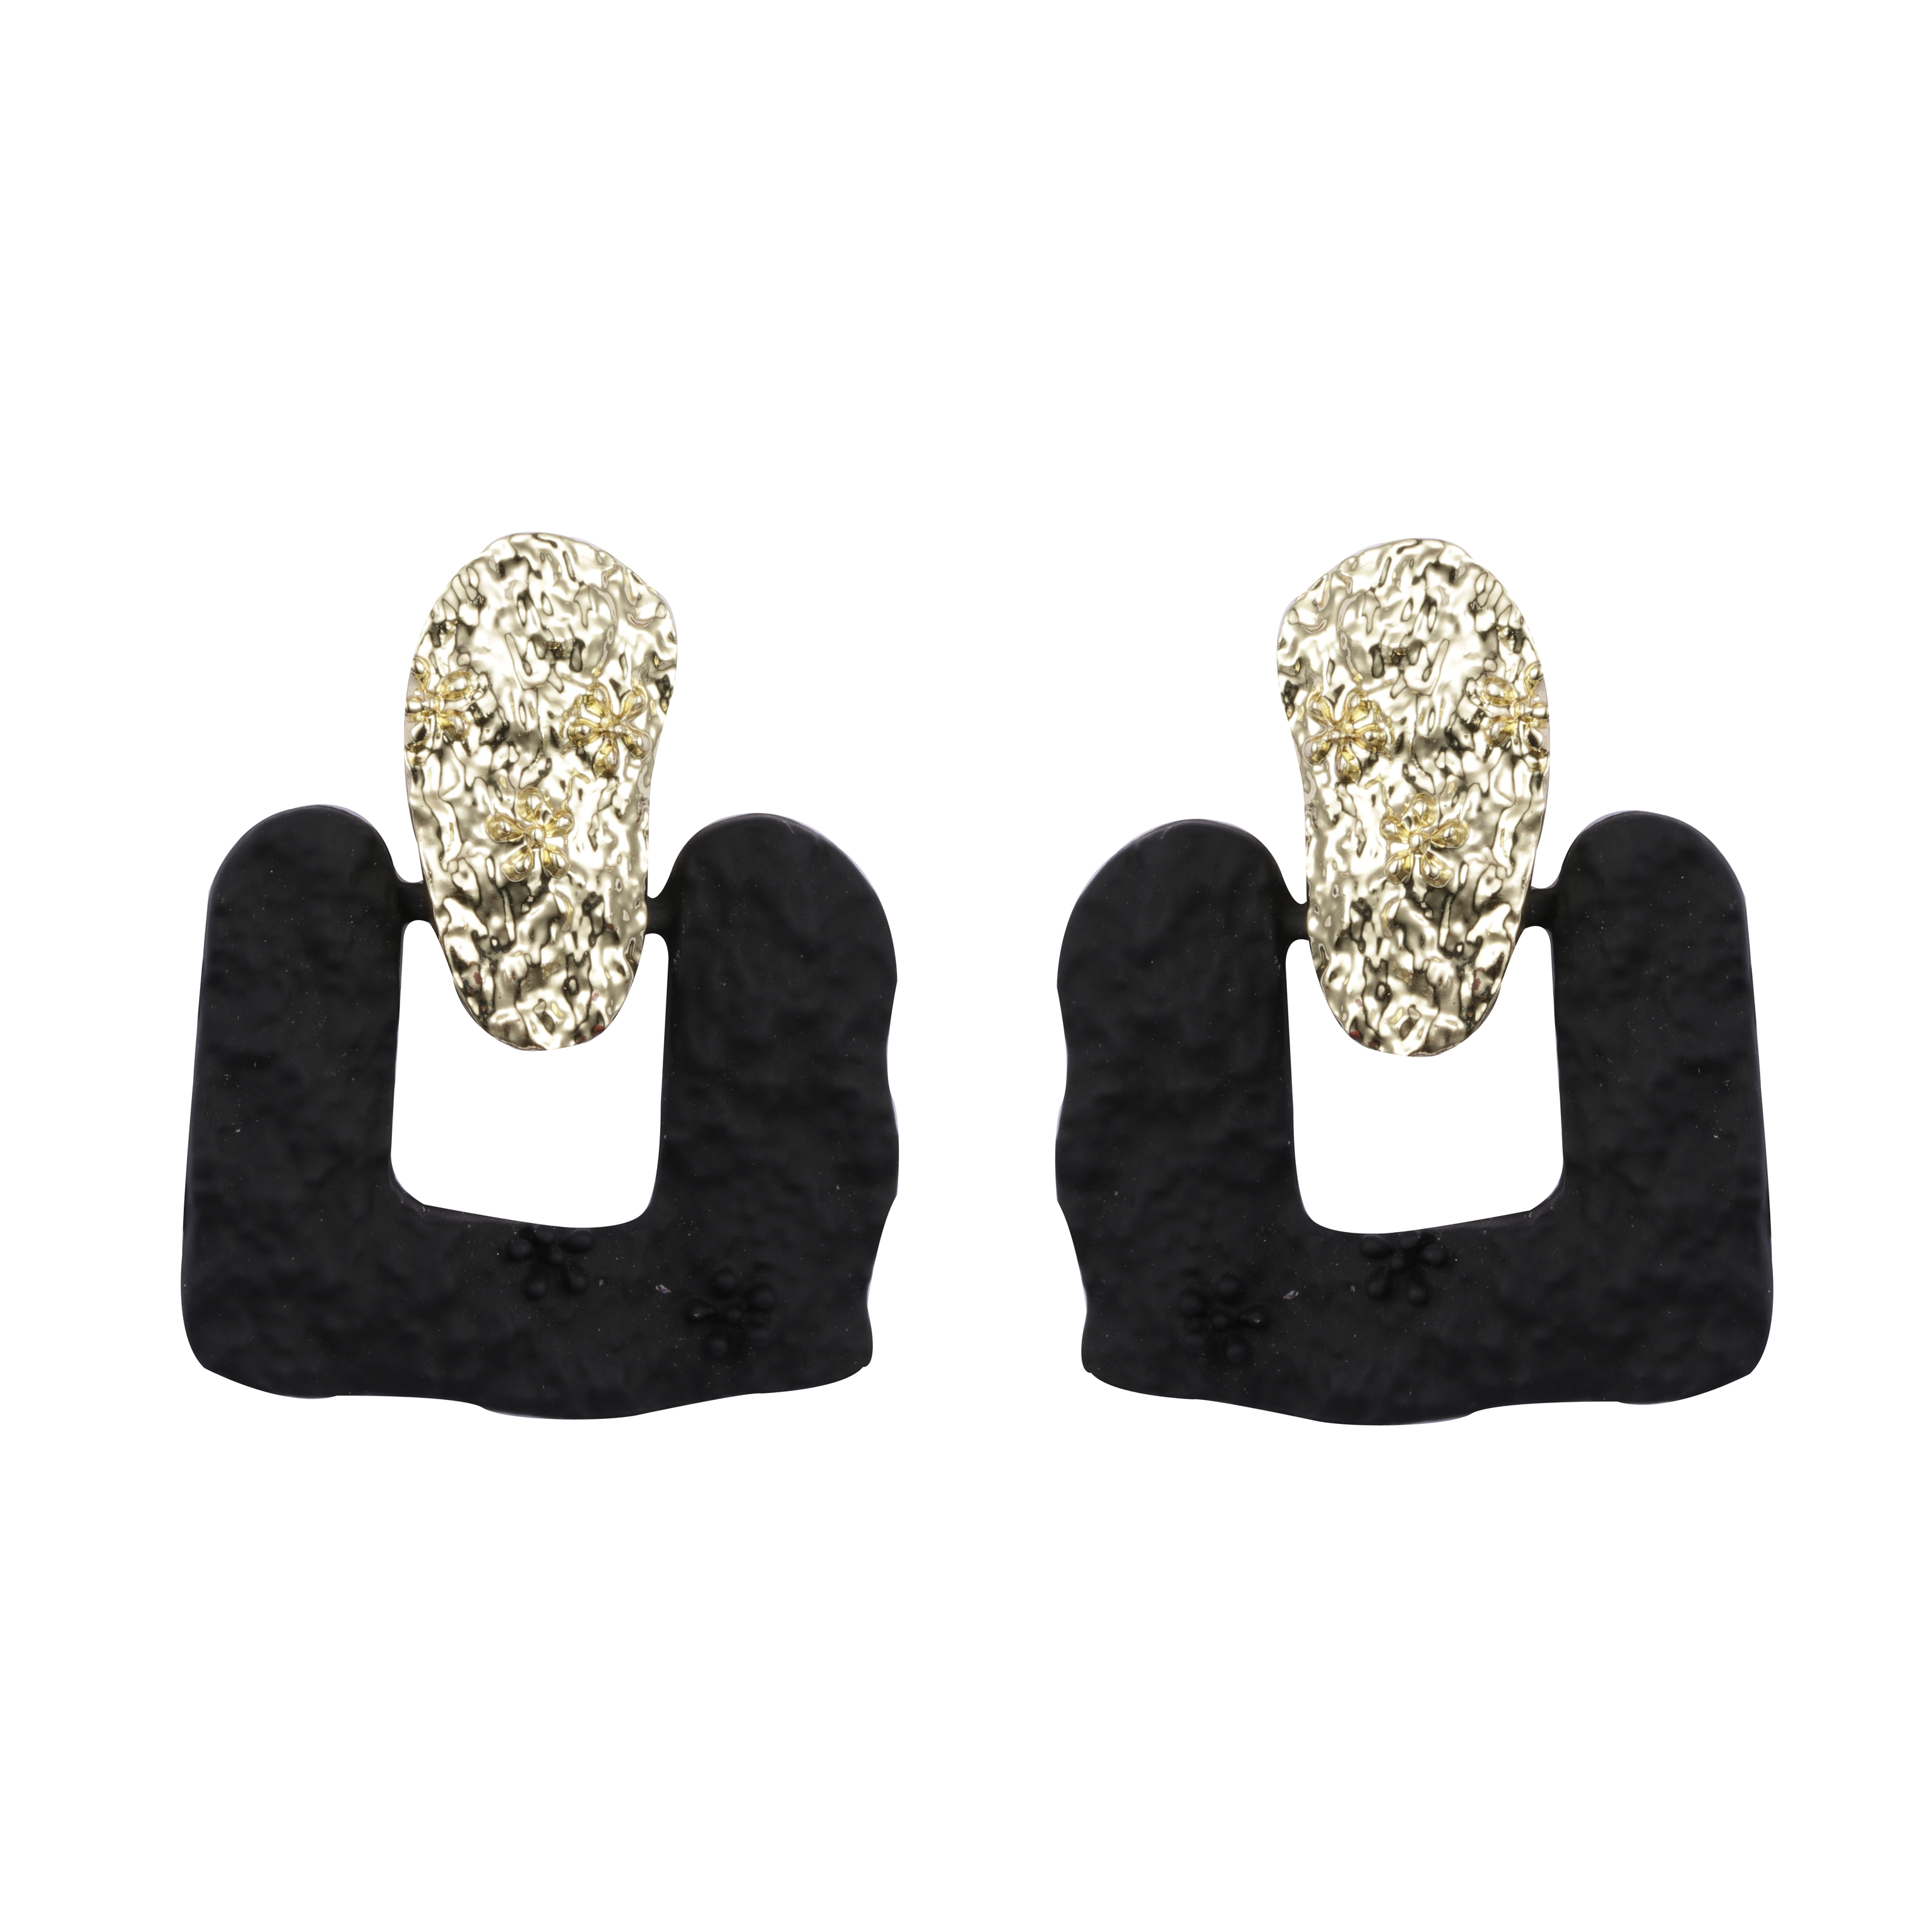 Low MOQ Gold Plated Fashion Series Black And Gold Earrings